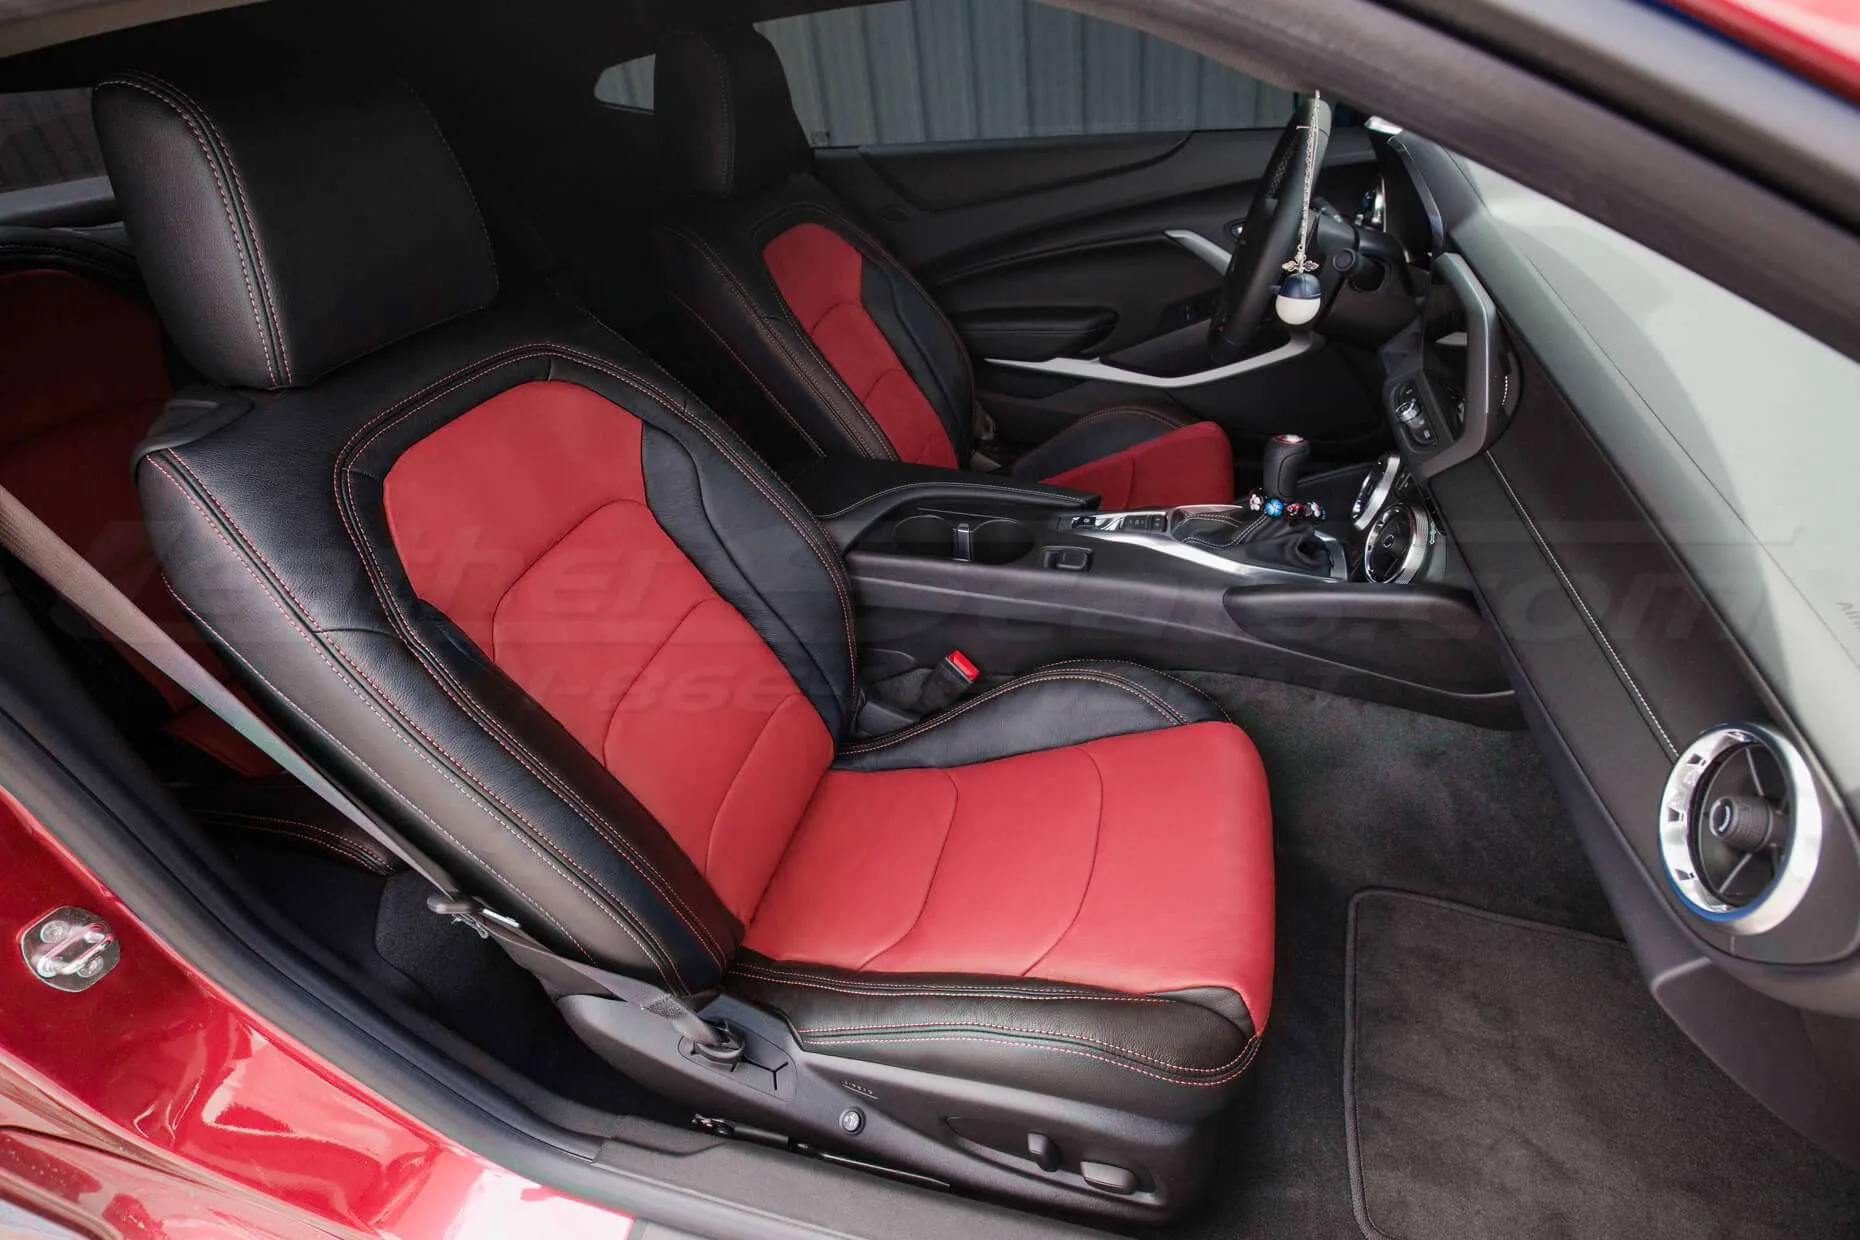 Chevrolet Camaro leather upholstery kit installed - red and black - front passenger seat